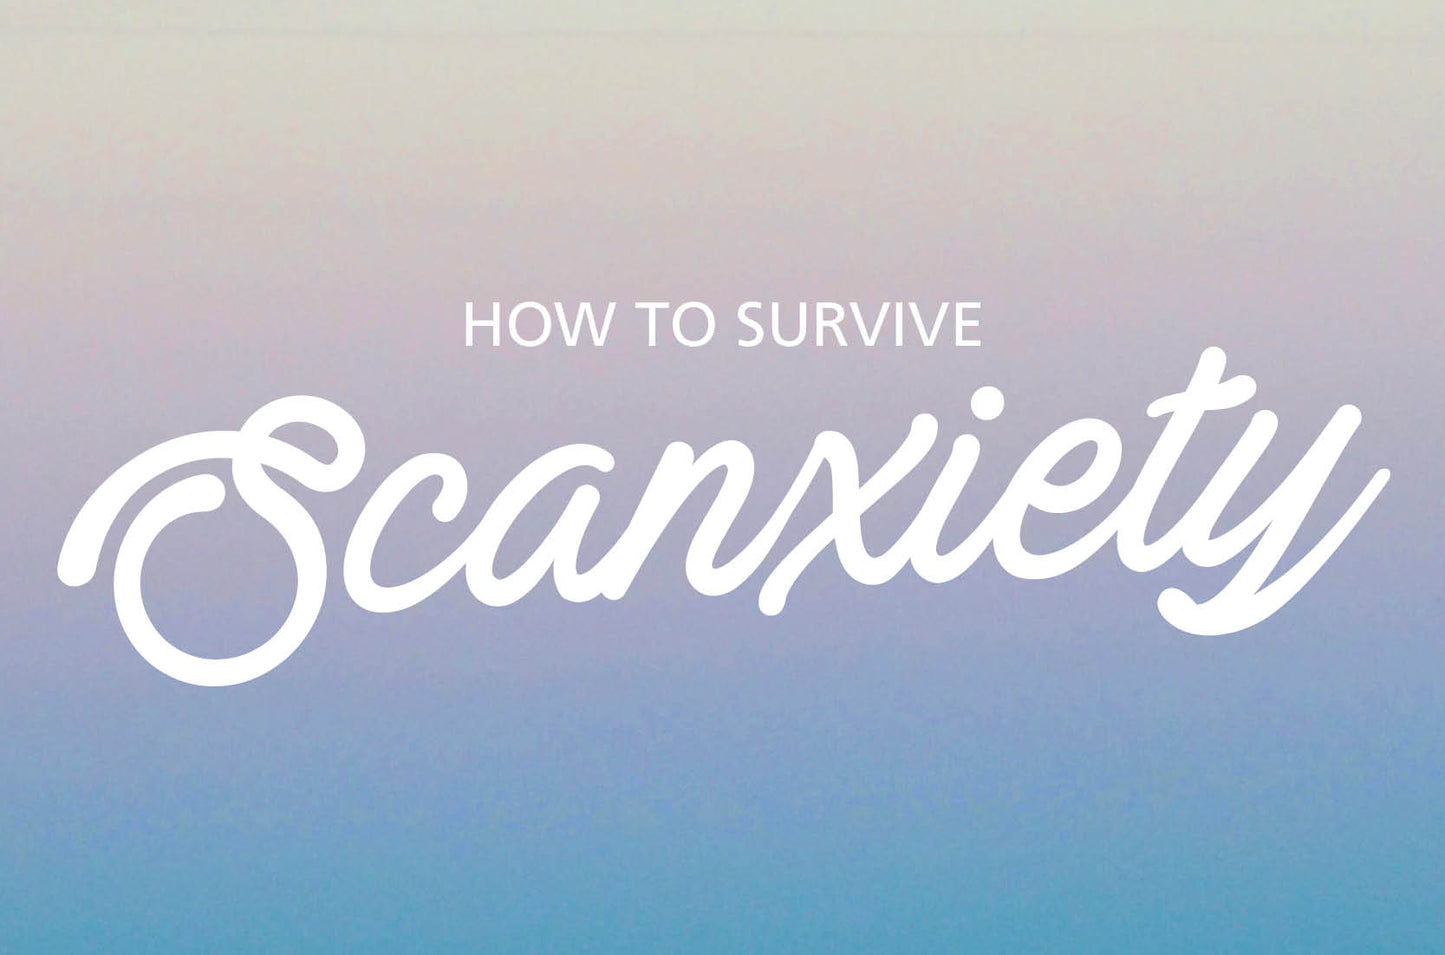 How to survive scanxiety from a 3 x cancer survivor